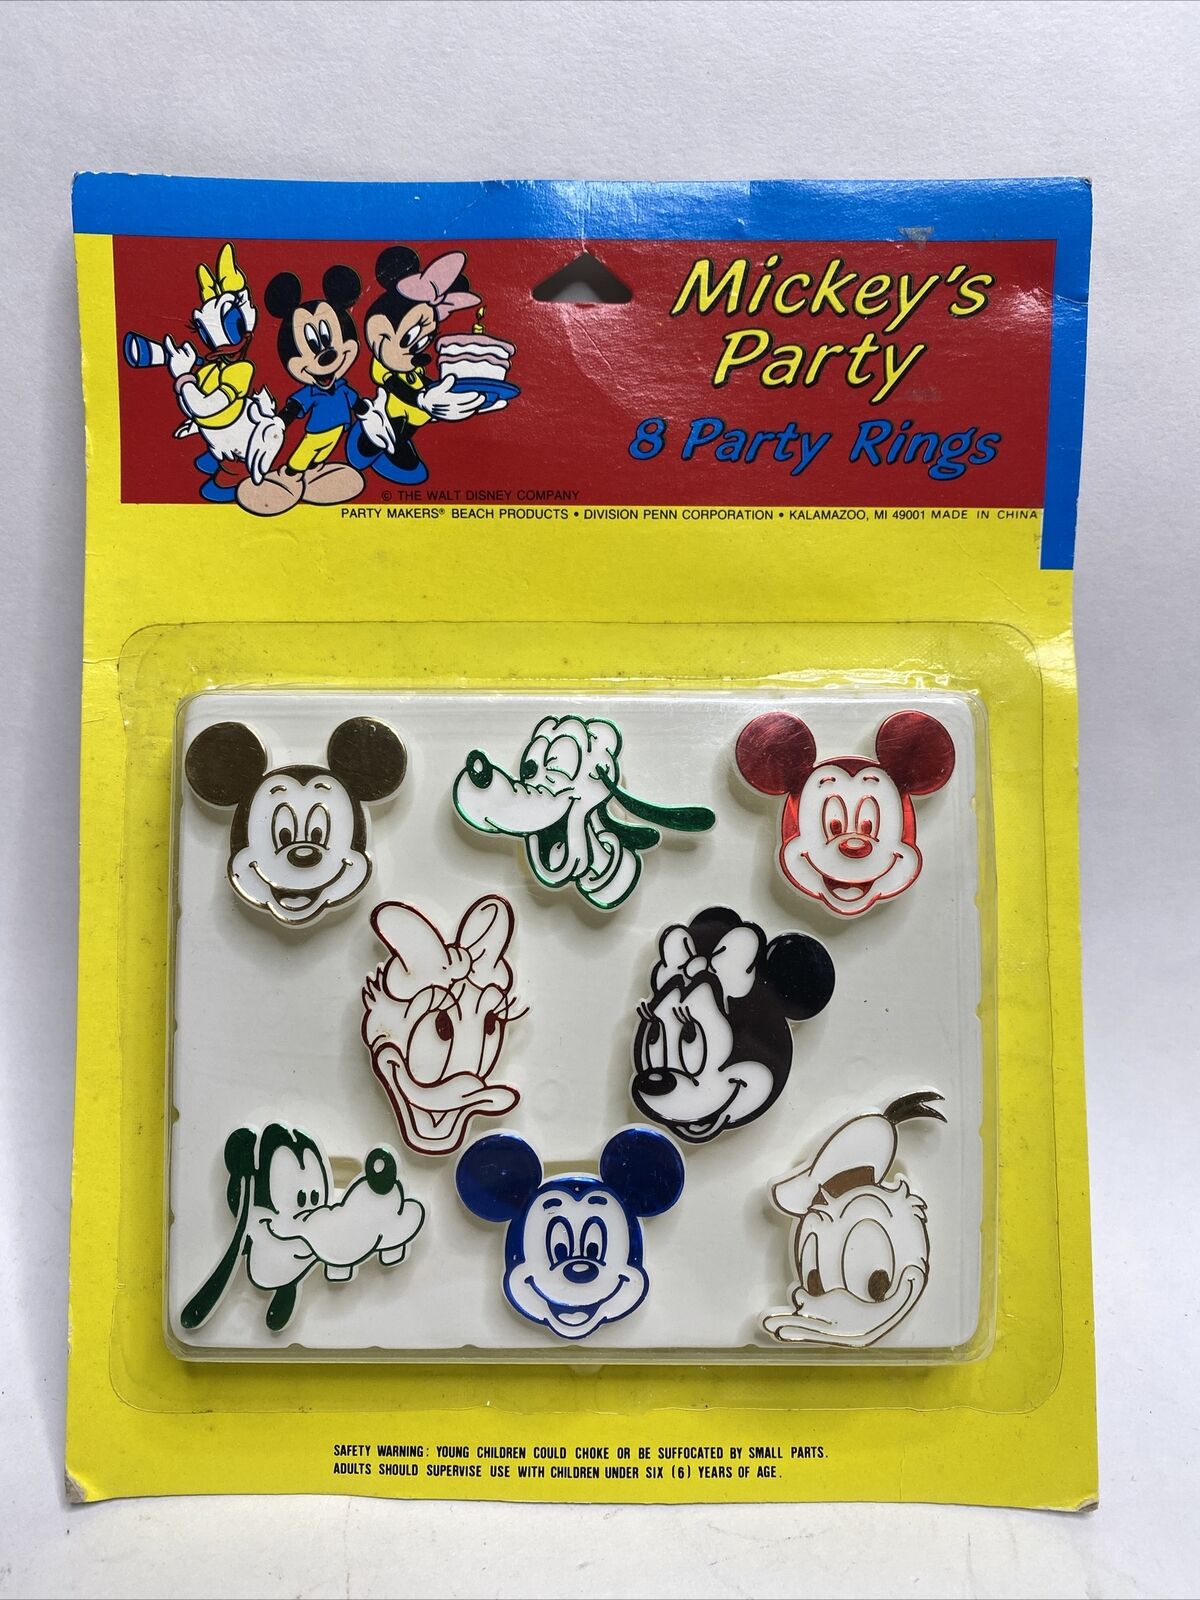 Disney Vtg Micky\'s Party 8 Party Rings - Mickey Mouse Minnie Donald Goofy